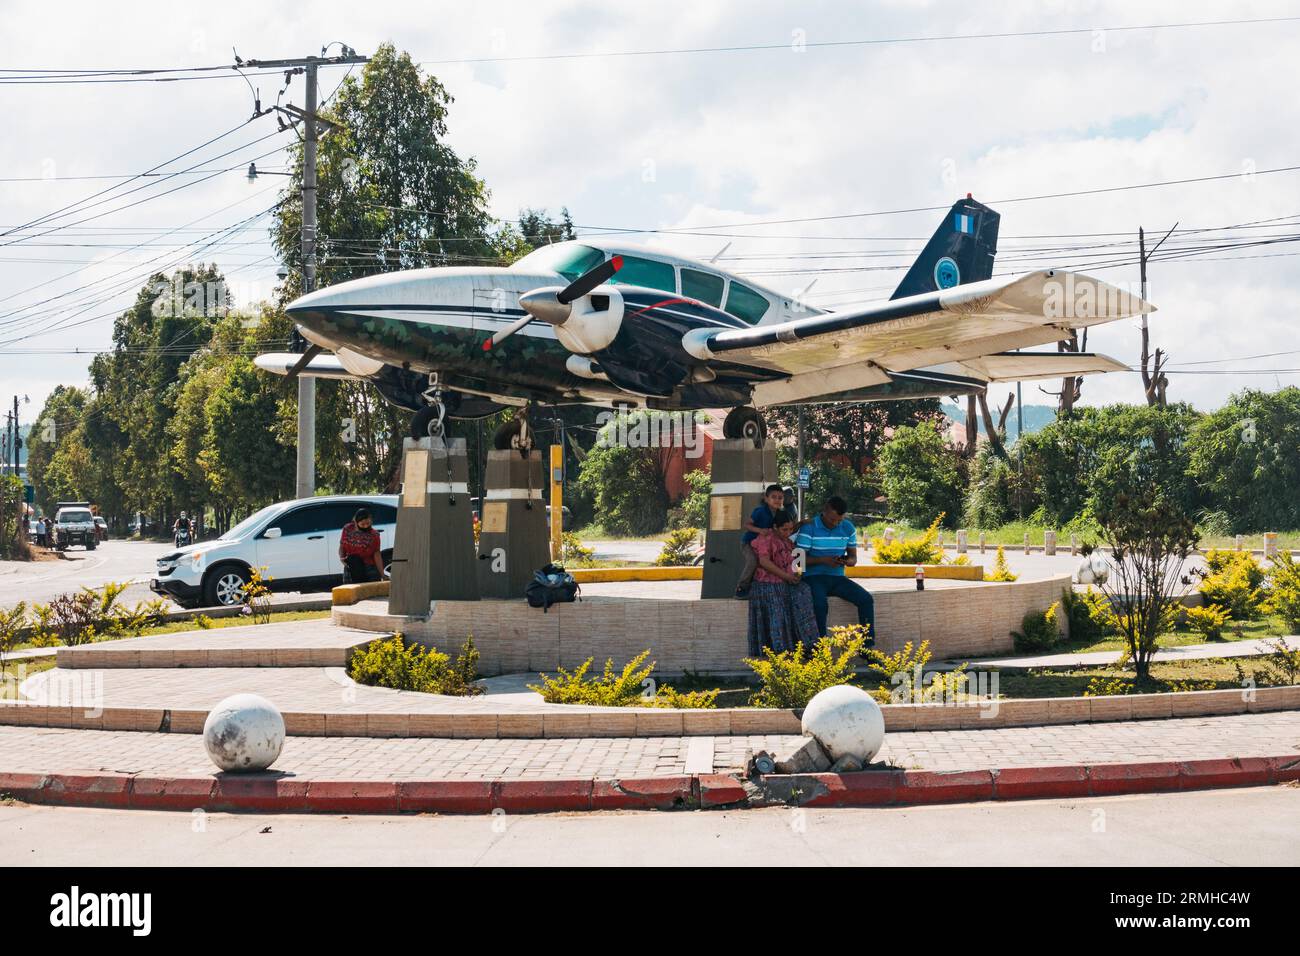 a Piper Aztec mounted on a traffic roundabout as a monument at the entrance to Cobán Airport, Guatemala Stock Photo